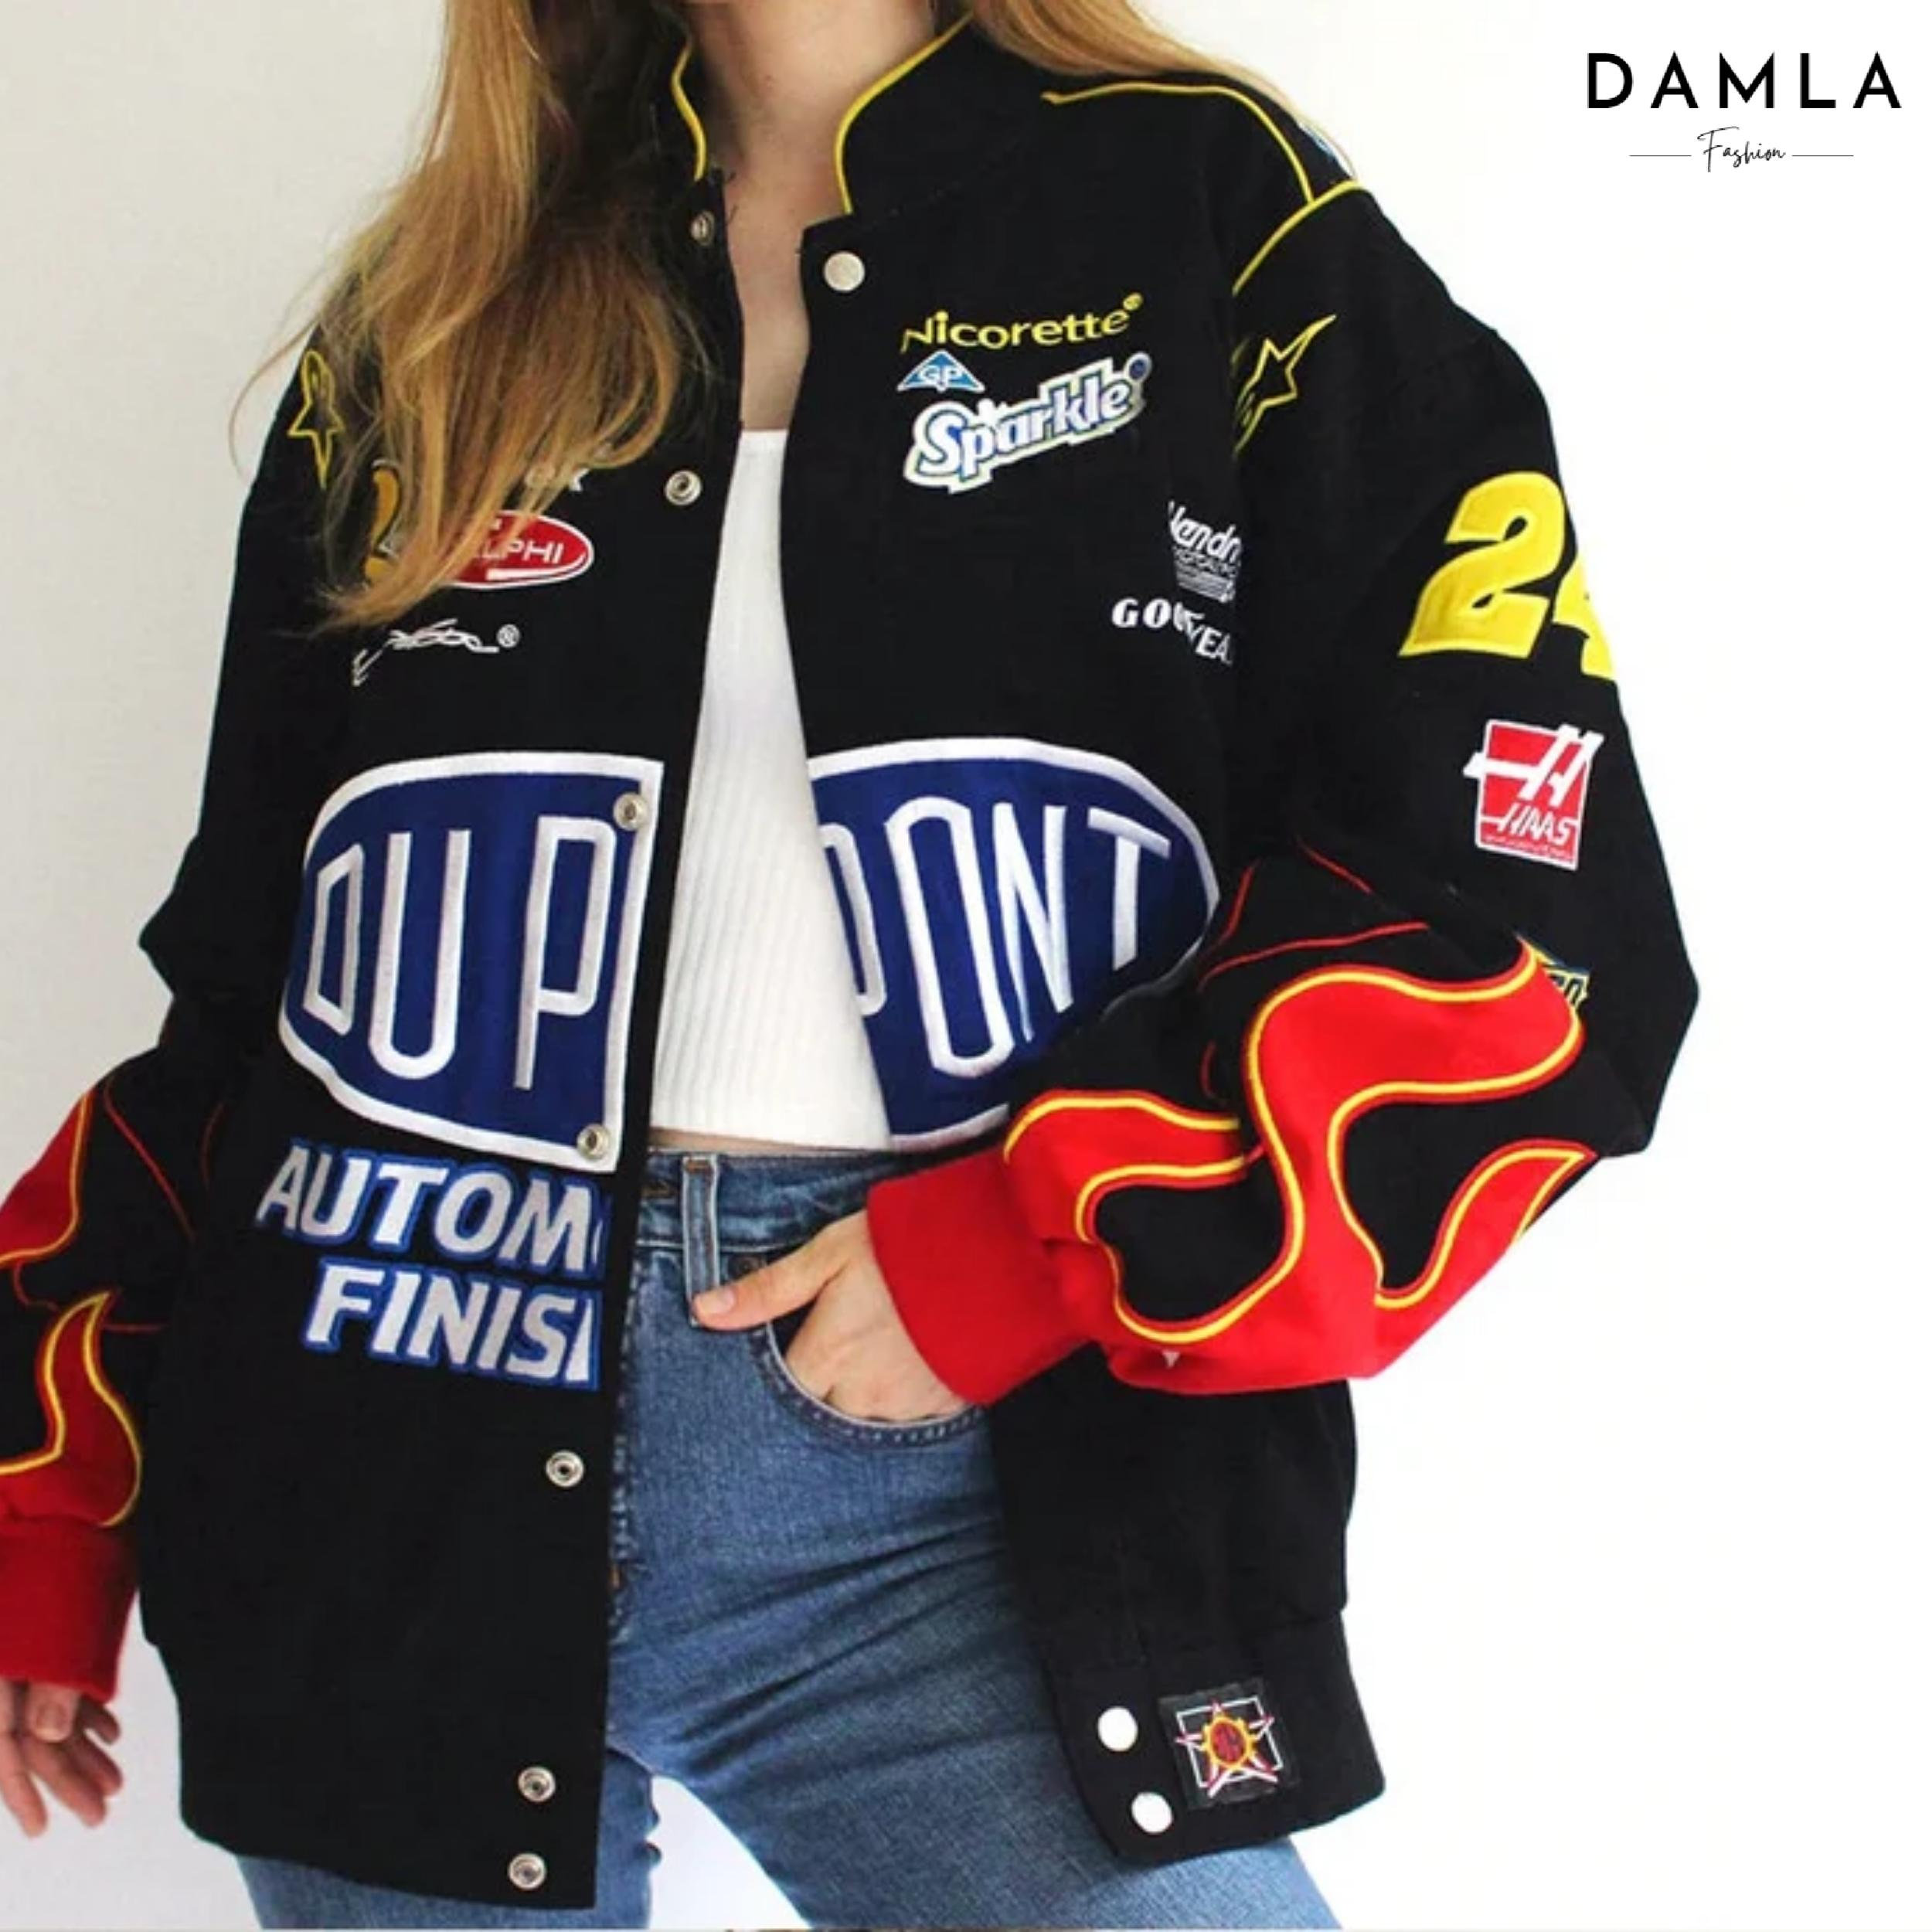 Vintage Y2K NASCAR Fan Racing Jacket with Oversized Fit and Printed Logos